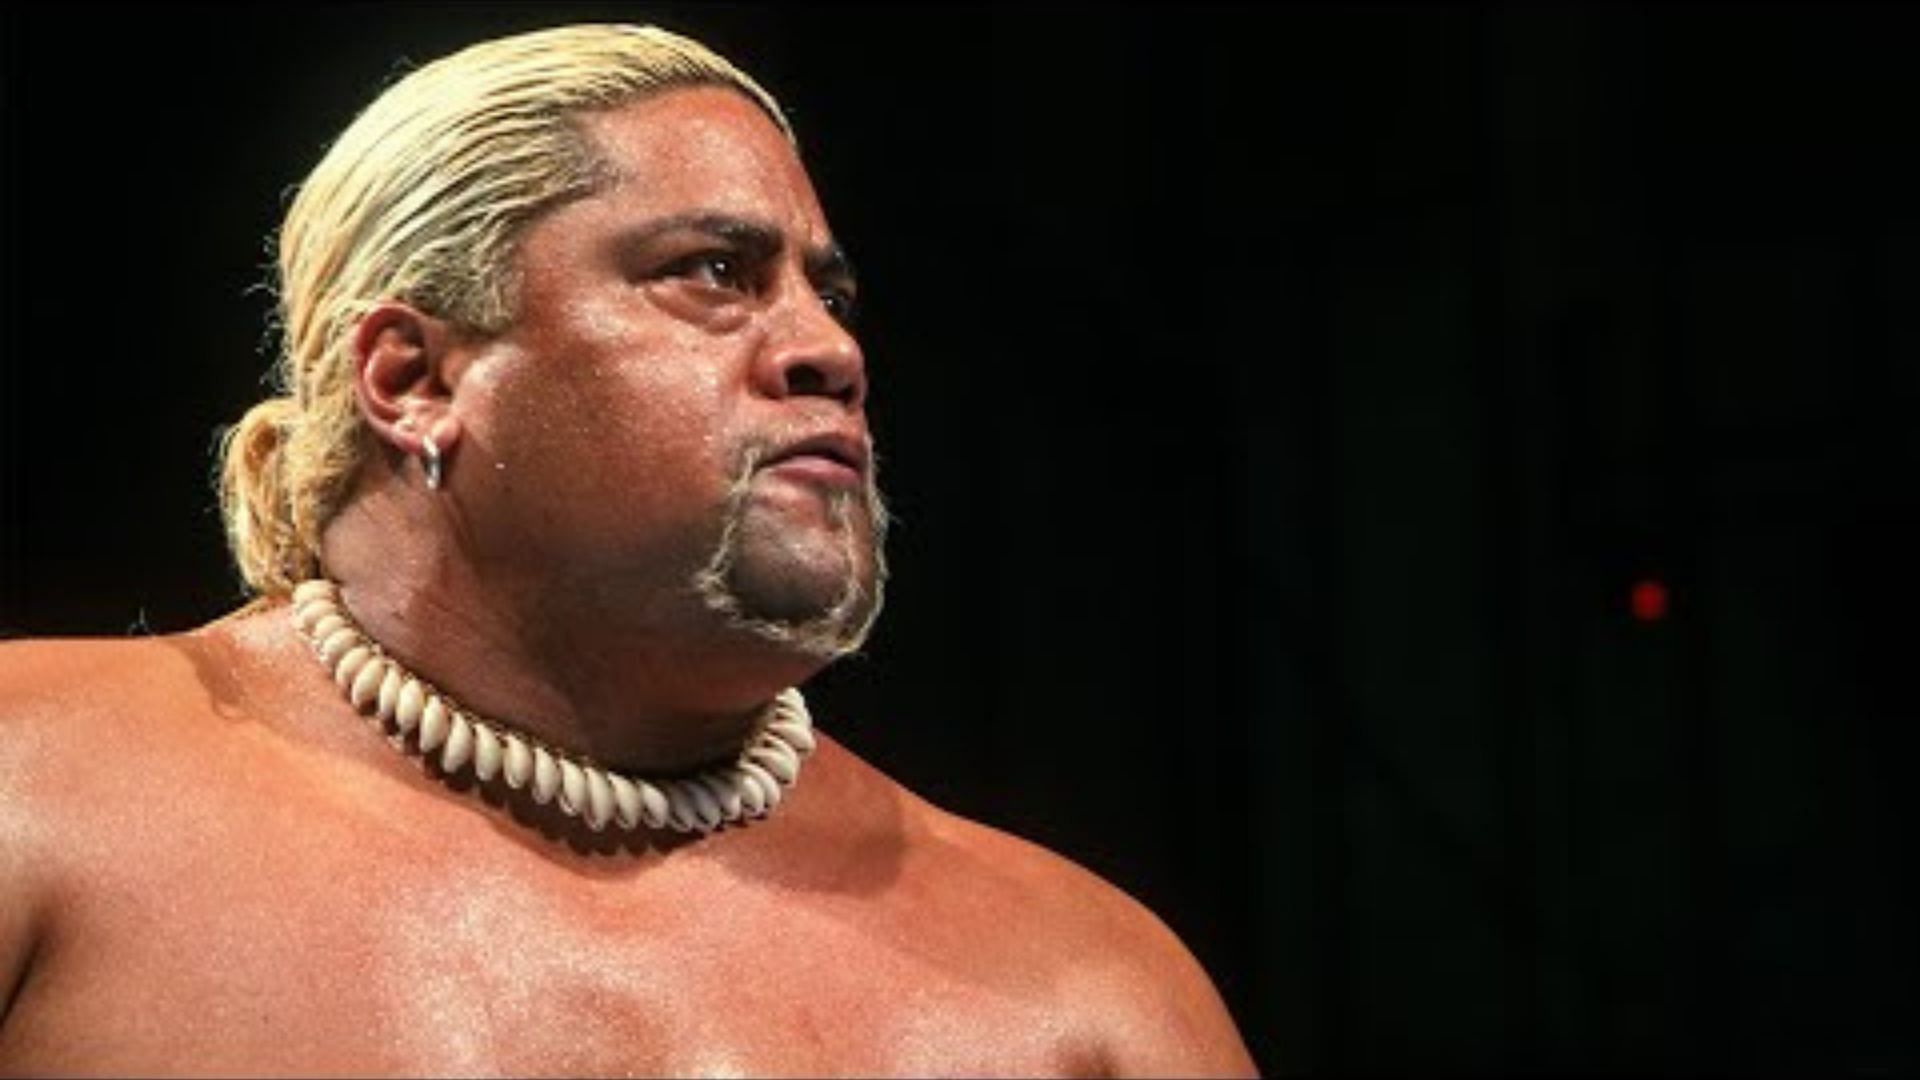 Rikishi is a member of the Anoa